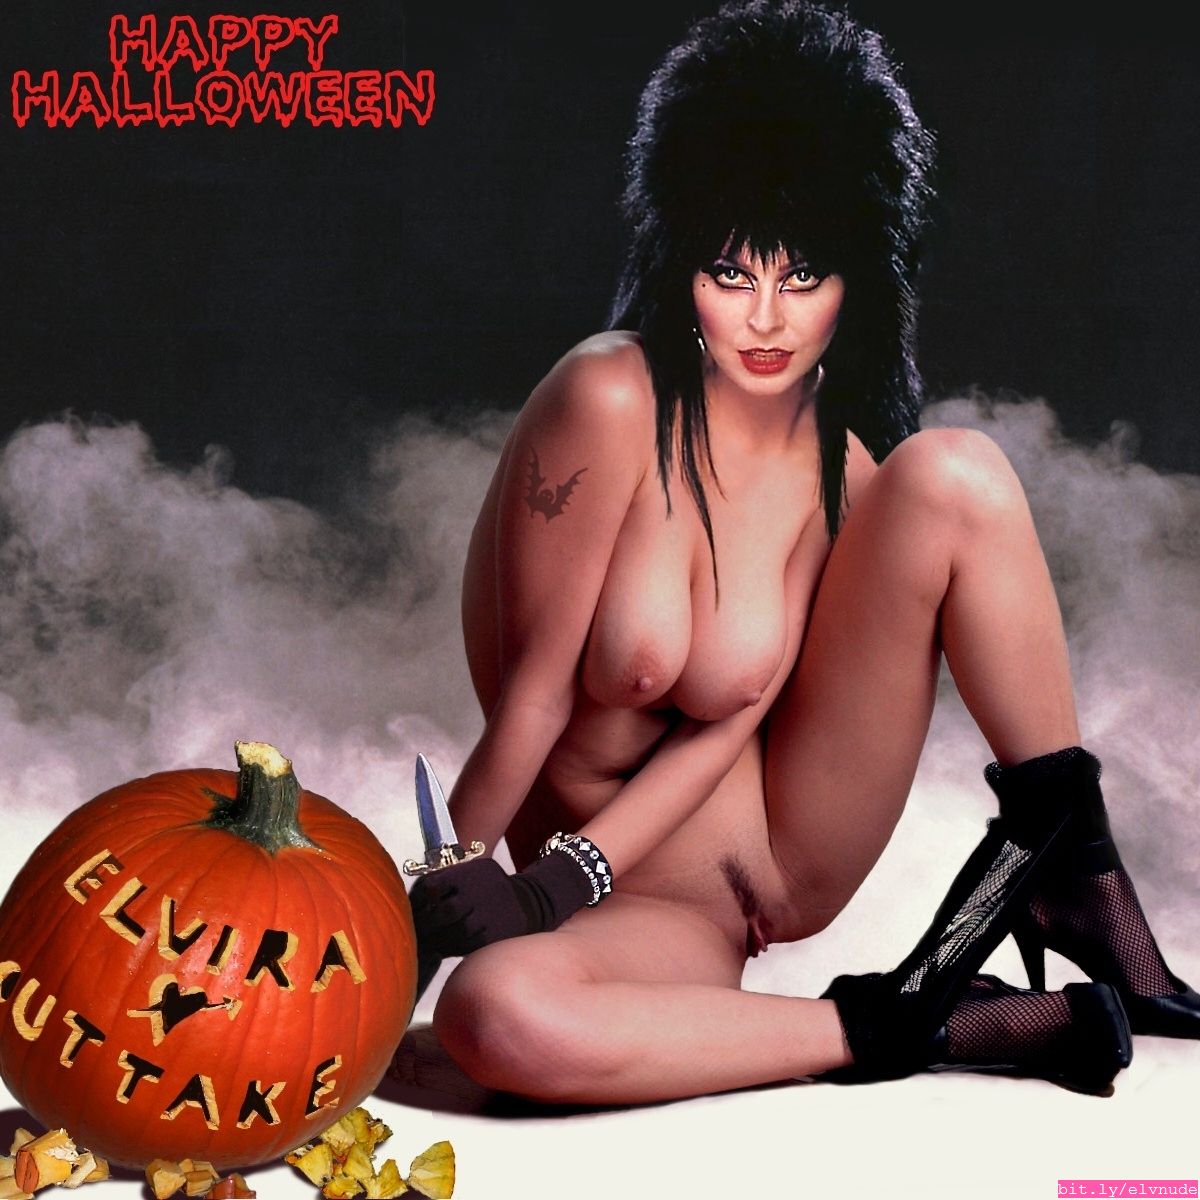 These pictures are the result of huge Elvira fans with some technical skill...